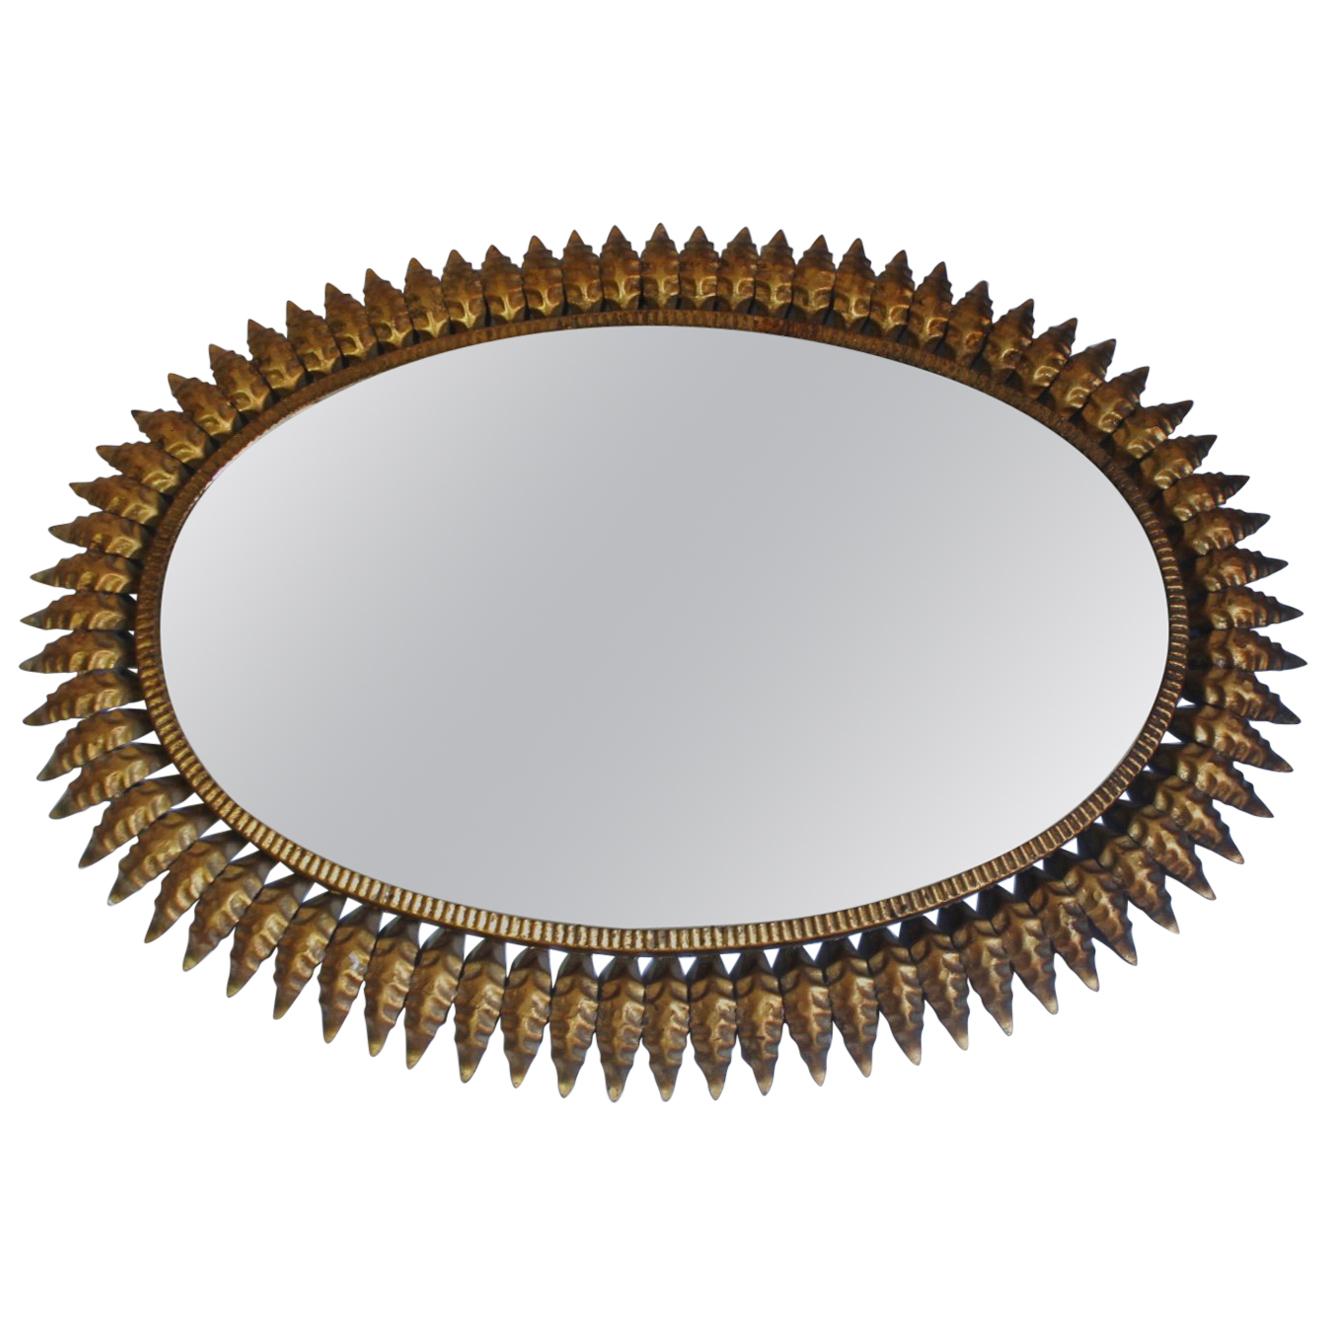 Midcentury Large Oval Sunburst Floral Brass Wall Mirror, 1950s For Sale